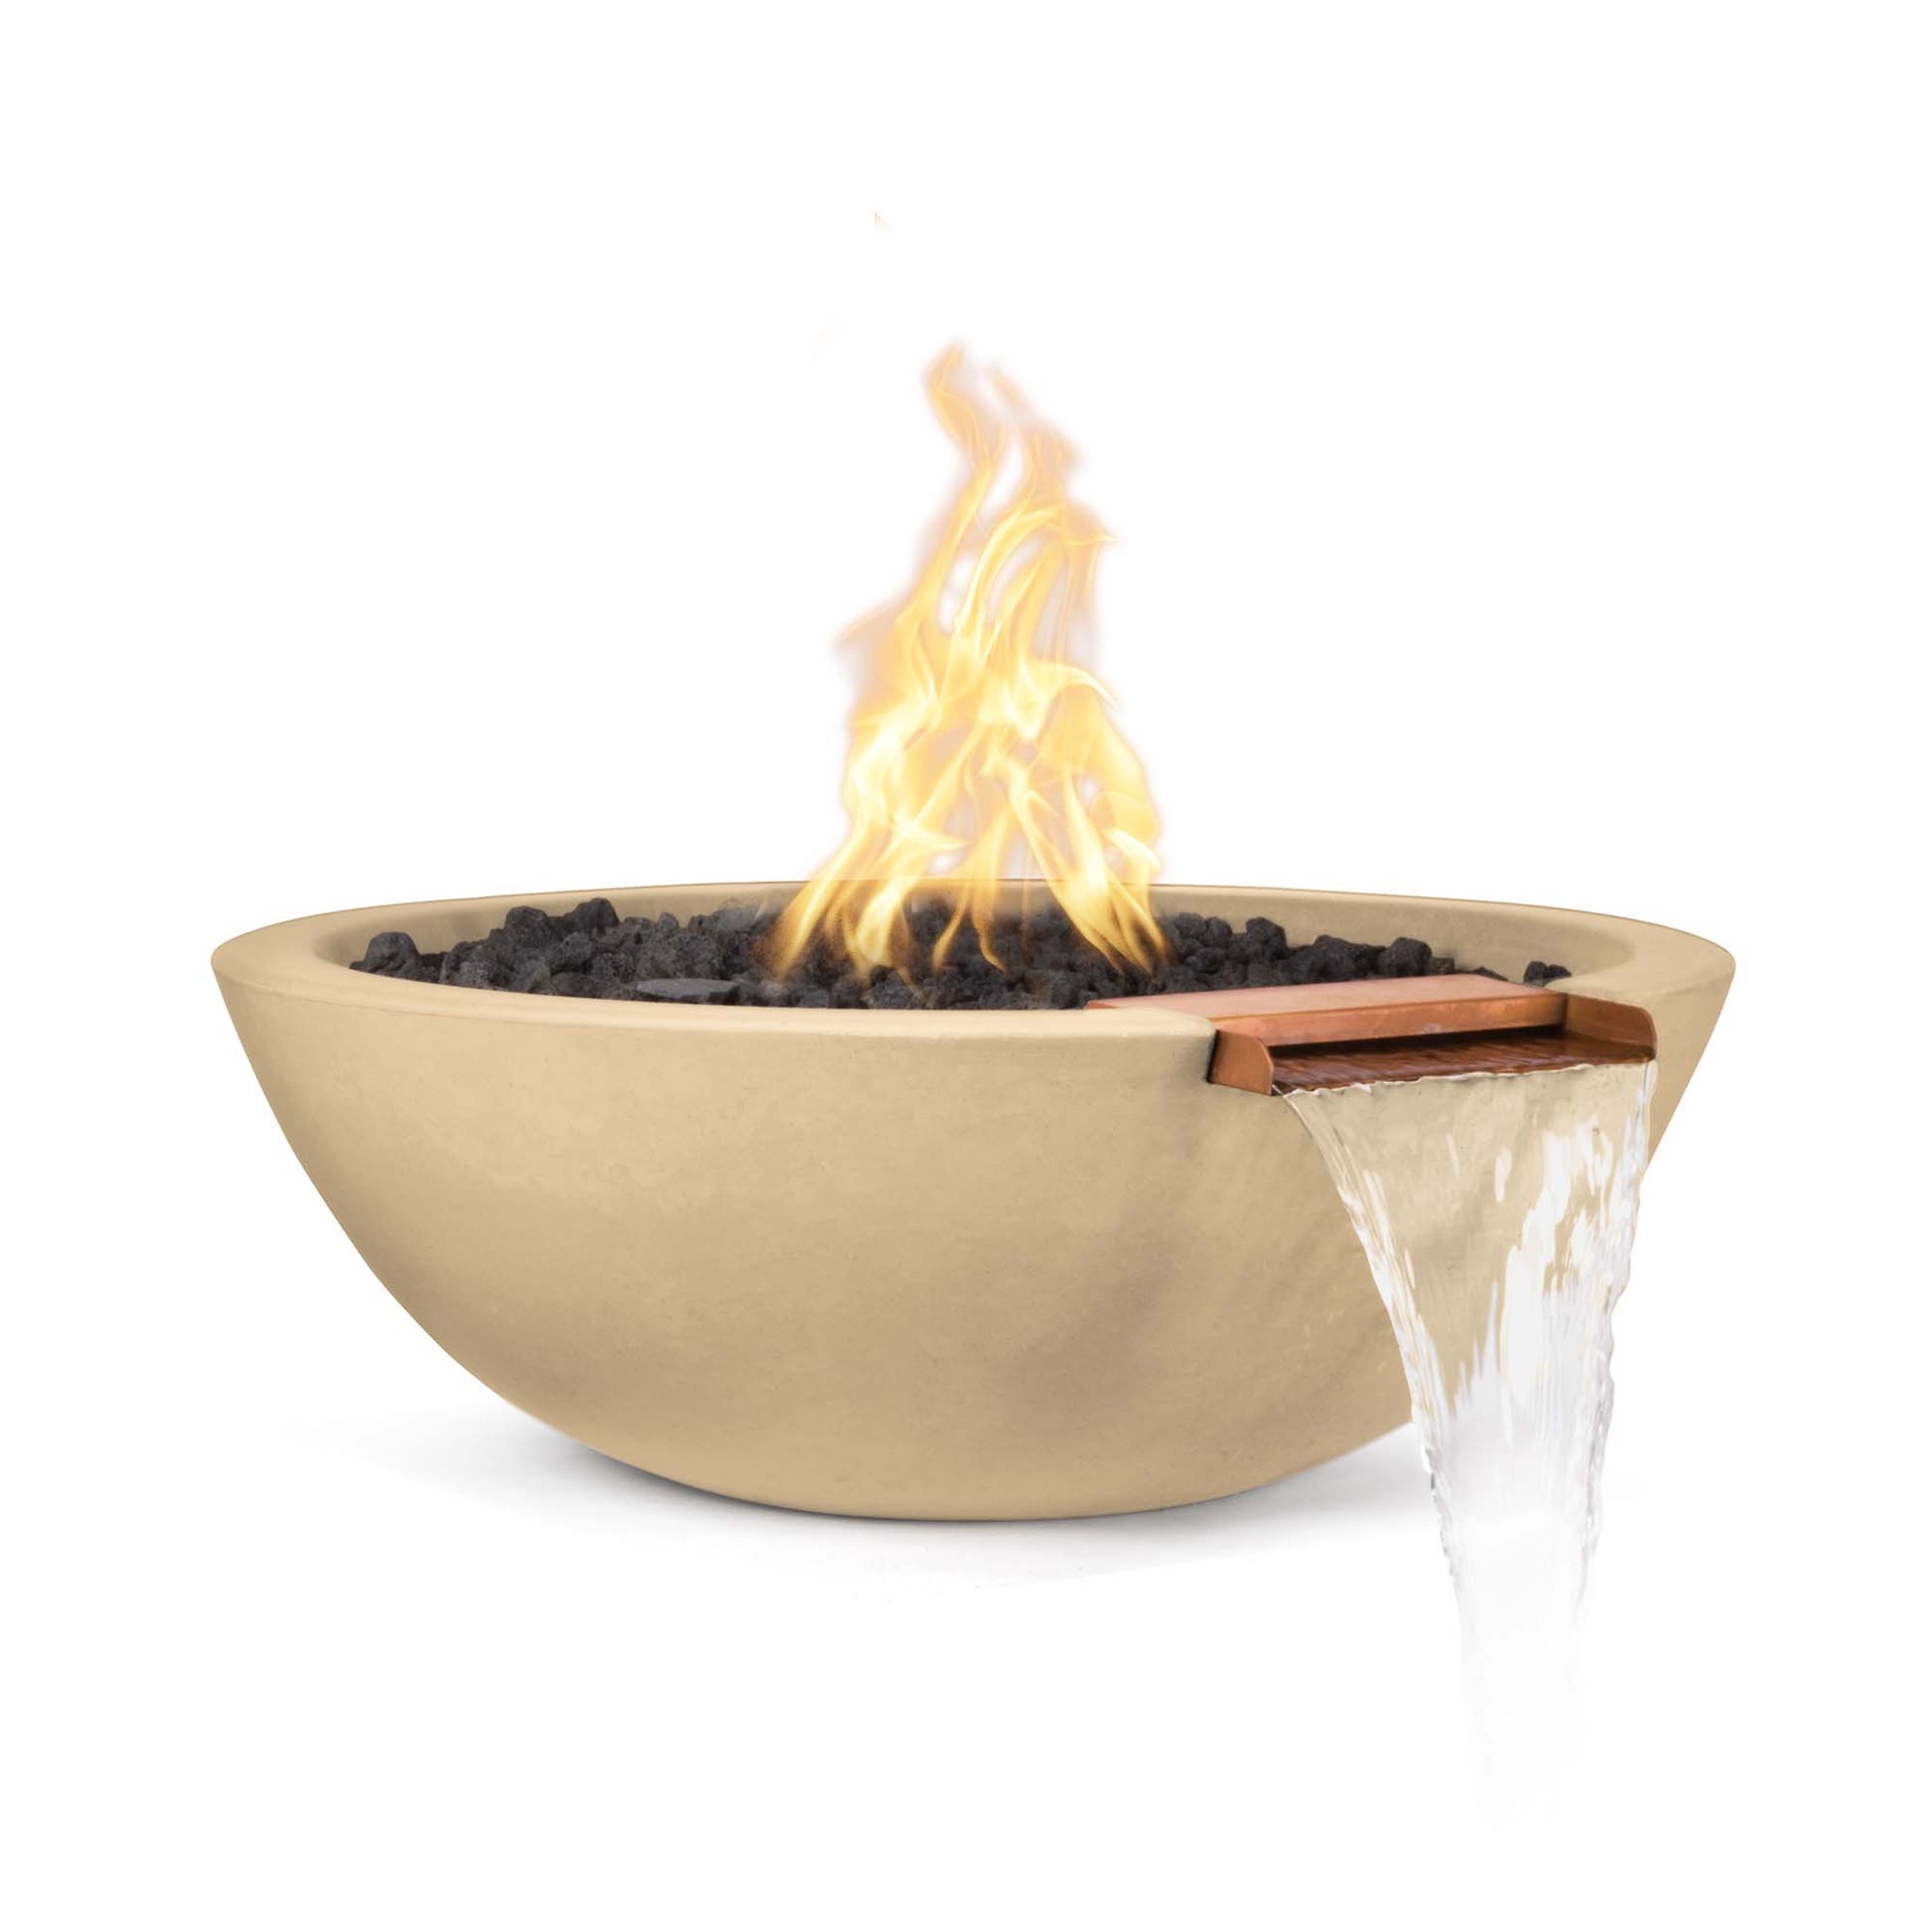 The Outdoor Plus Round Sedona 27" Metallic Copper GFRC Concrete Natural Gas Fire & Water Bowl with Match Lit with Flame Sense Ignition